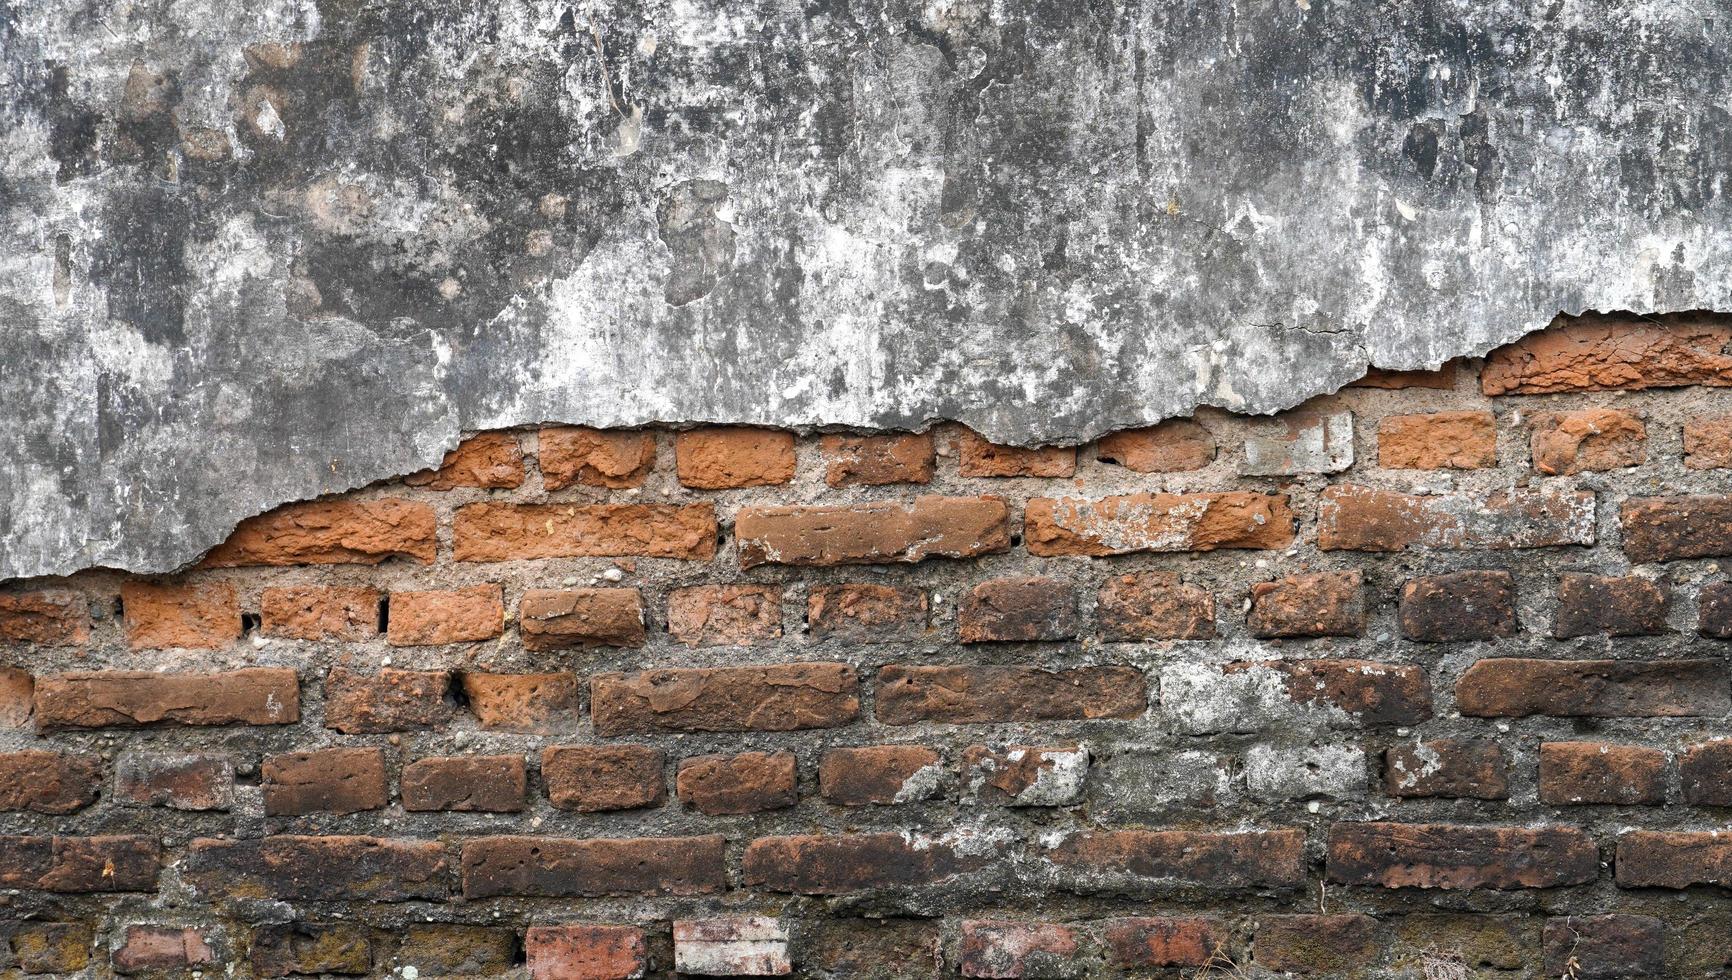 What to Do With a Brick Wall Inside Your Home